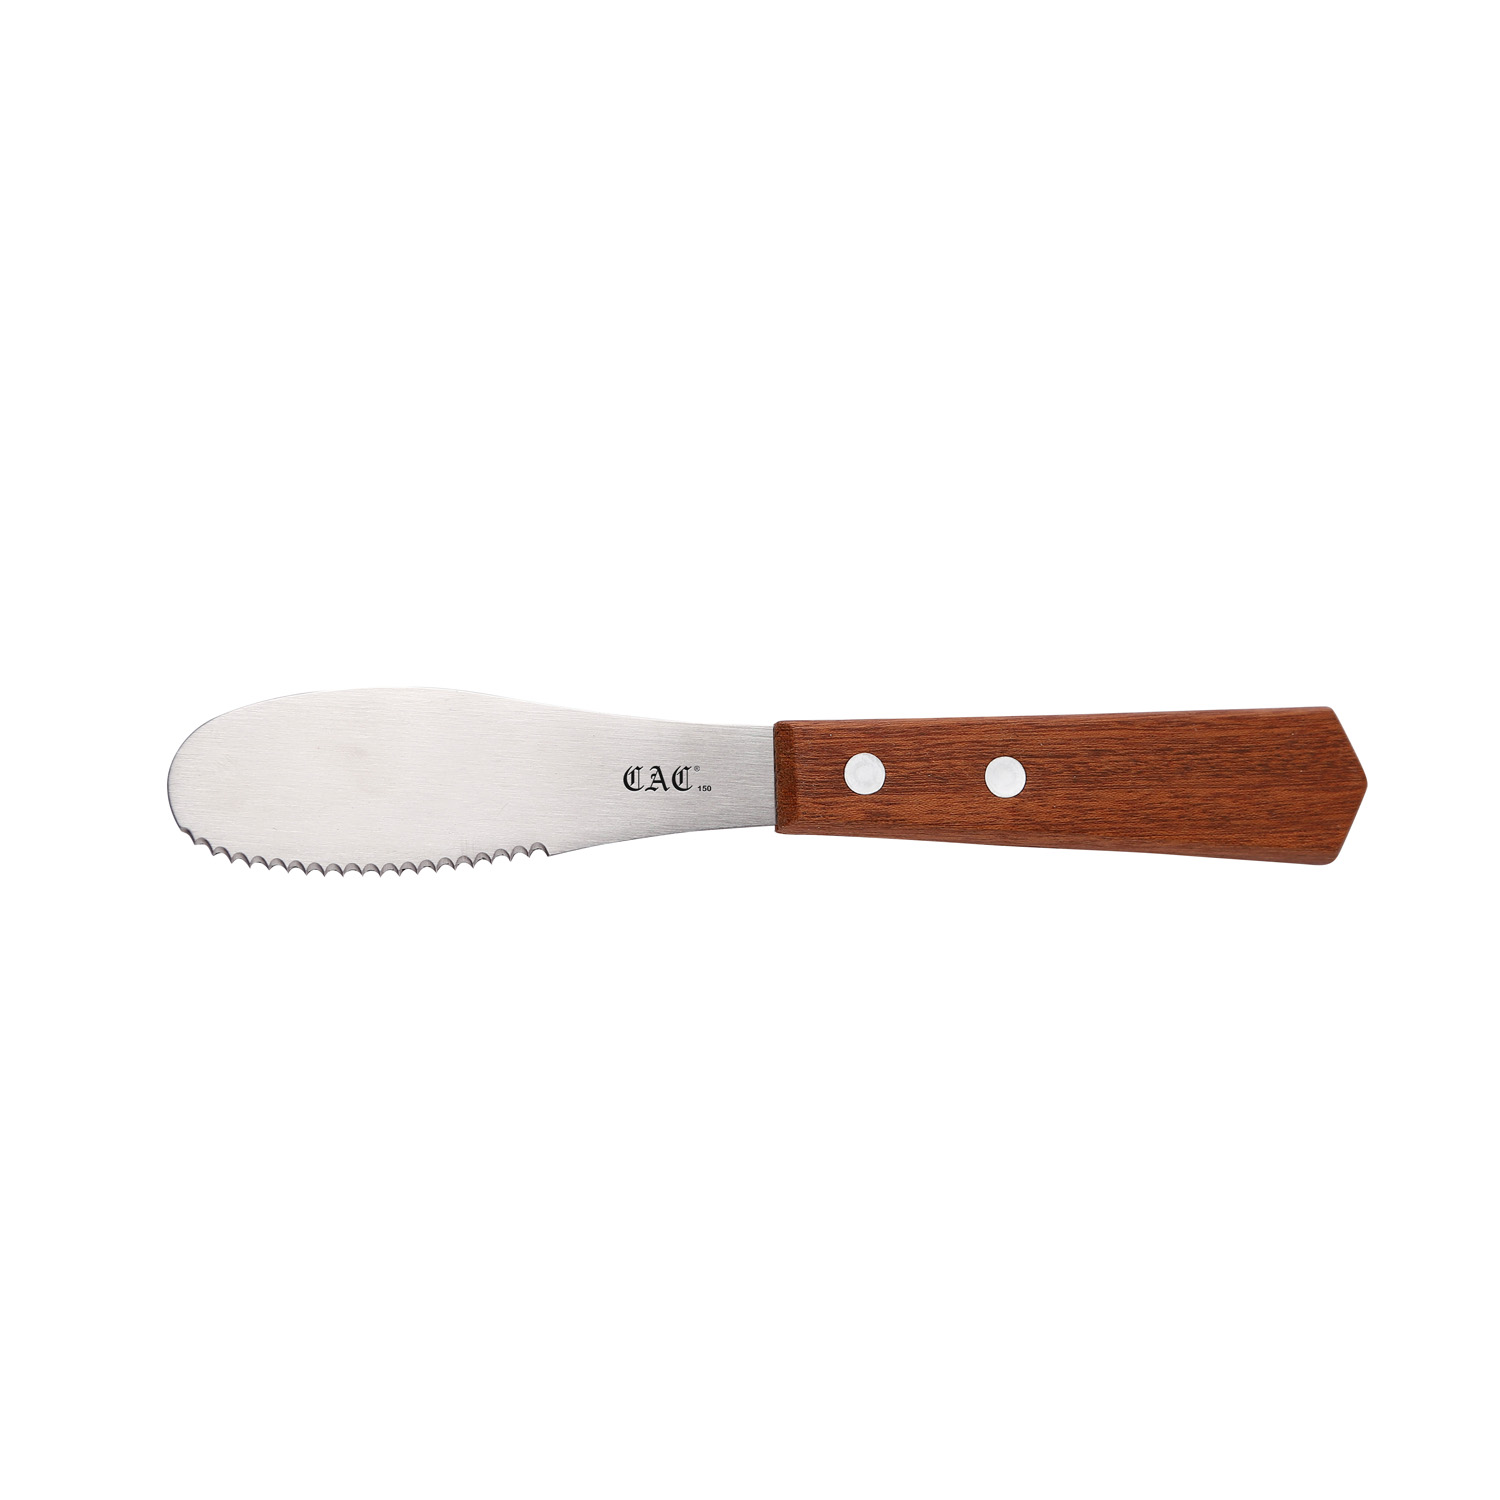 CAC China SPSW-4 Serrated Spreader with Wood Handle 3-3/4"